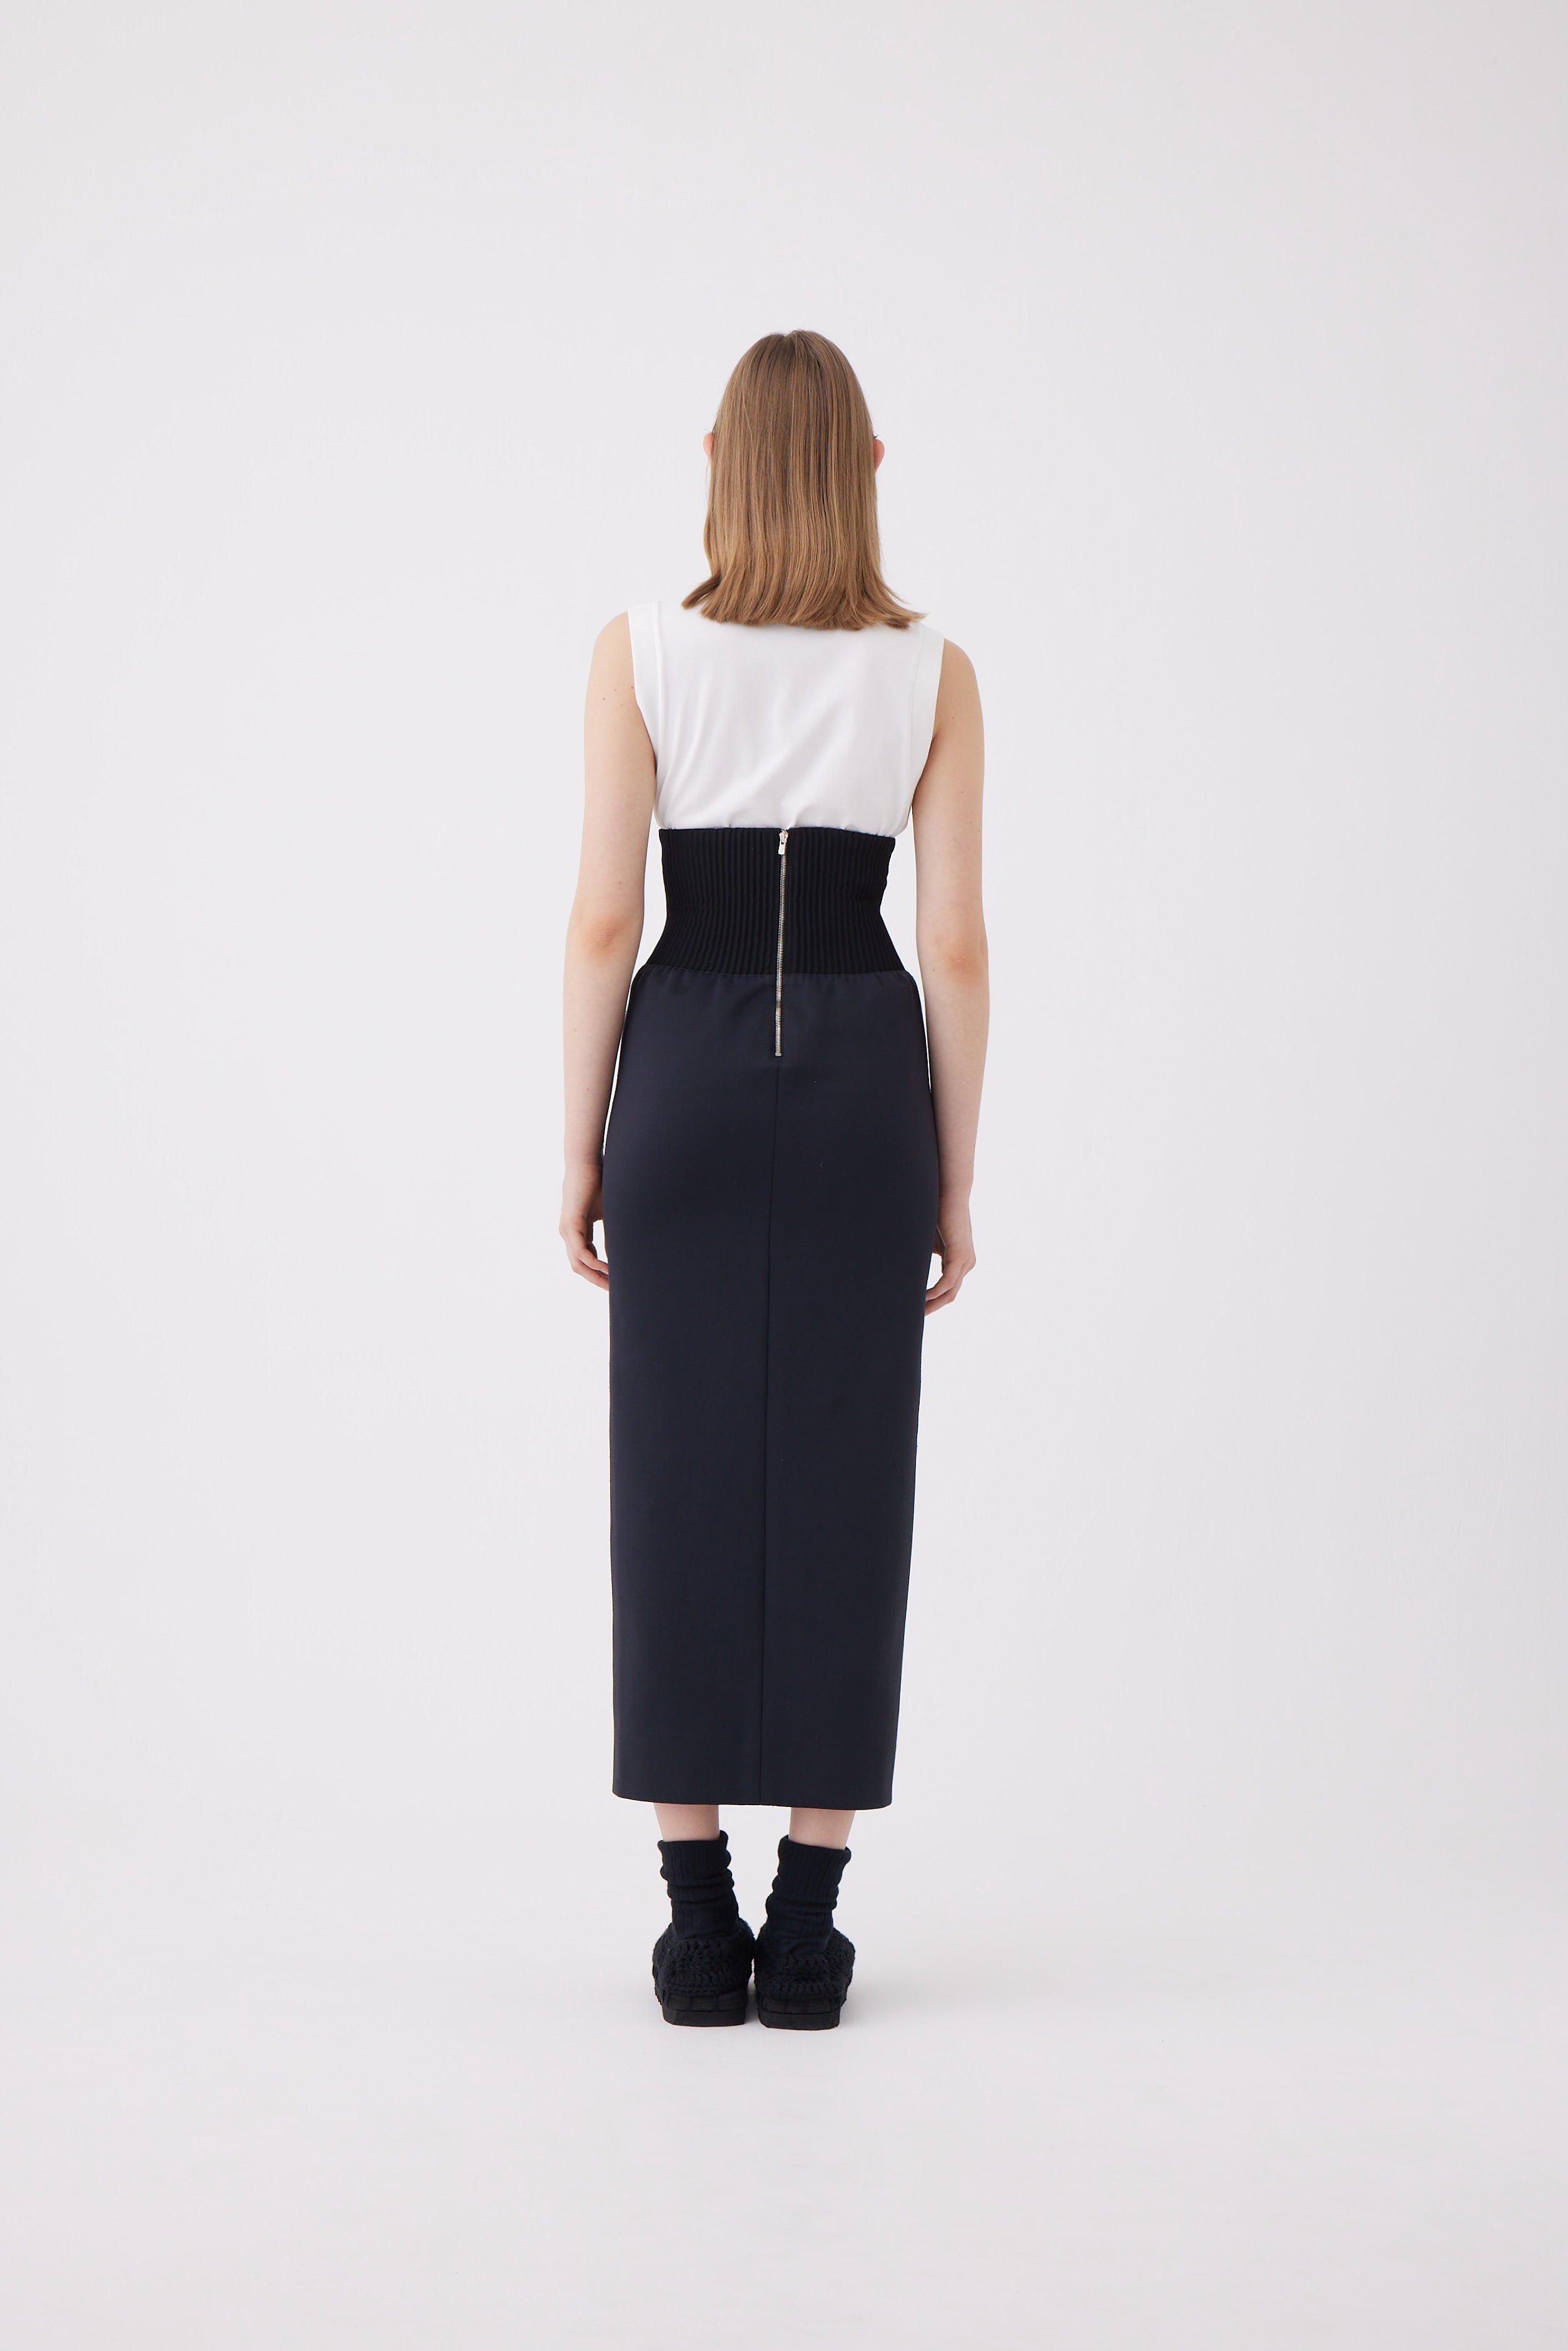 Jersey High-waisted Pencil Skirt in Black